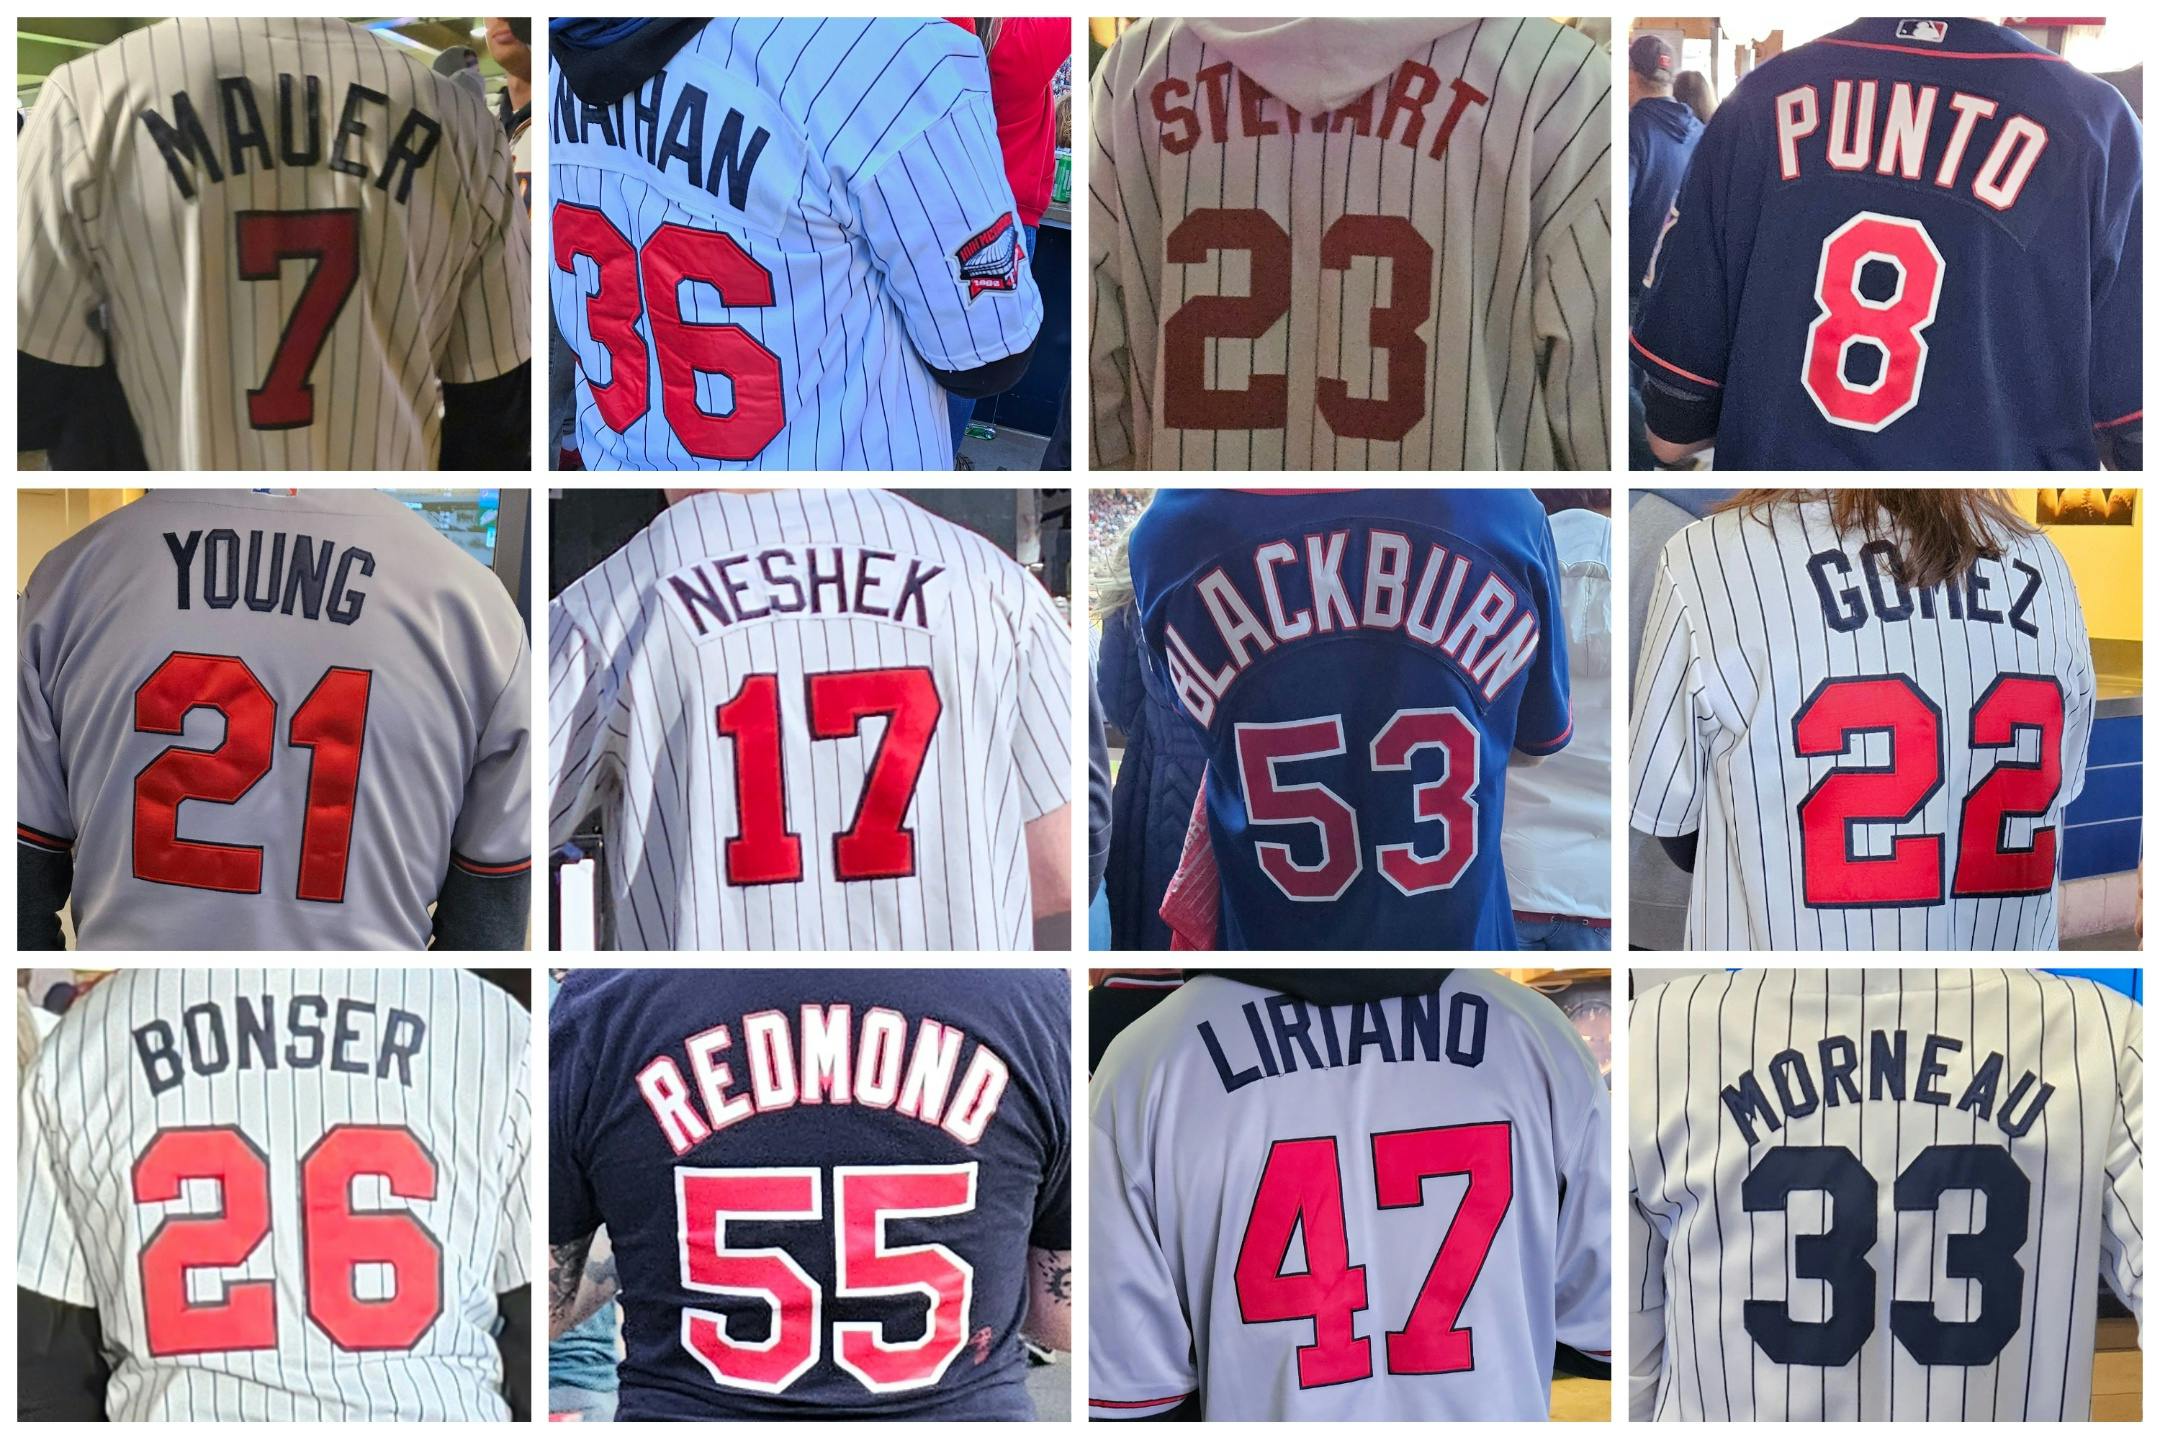 Numbers game: As playoffs hit Target Field, Twins fans wore 'em all